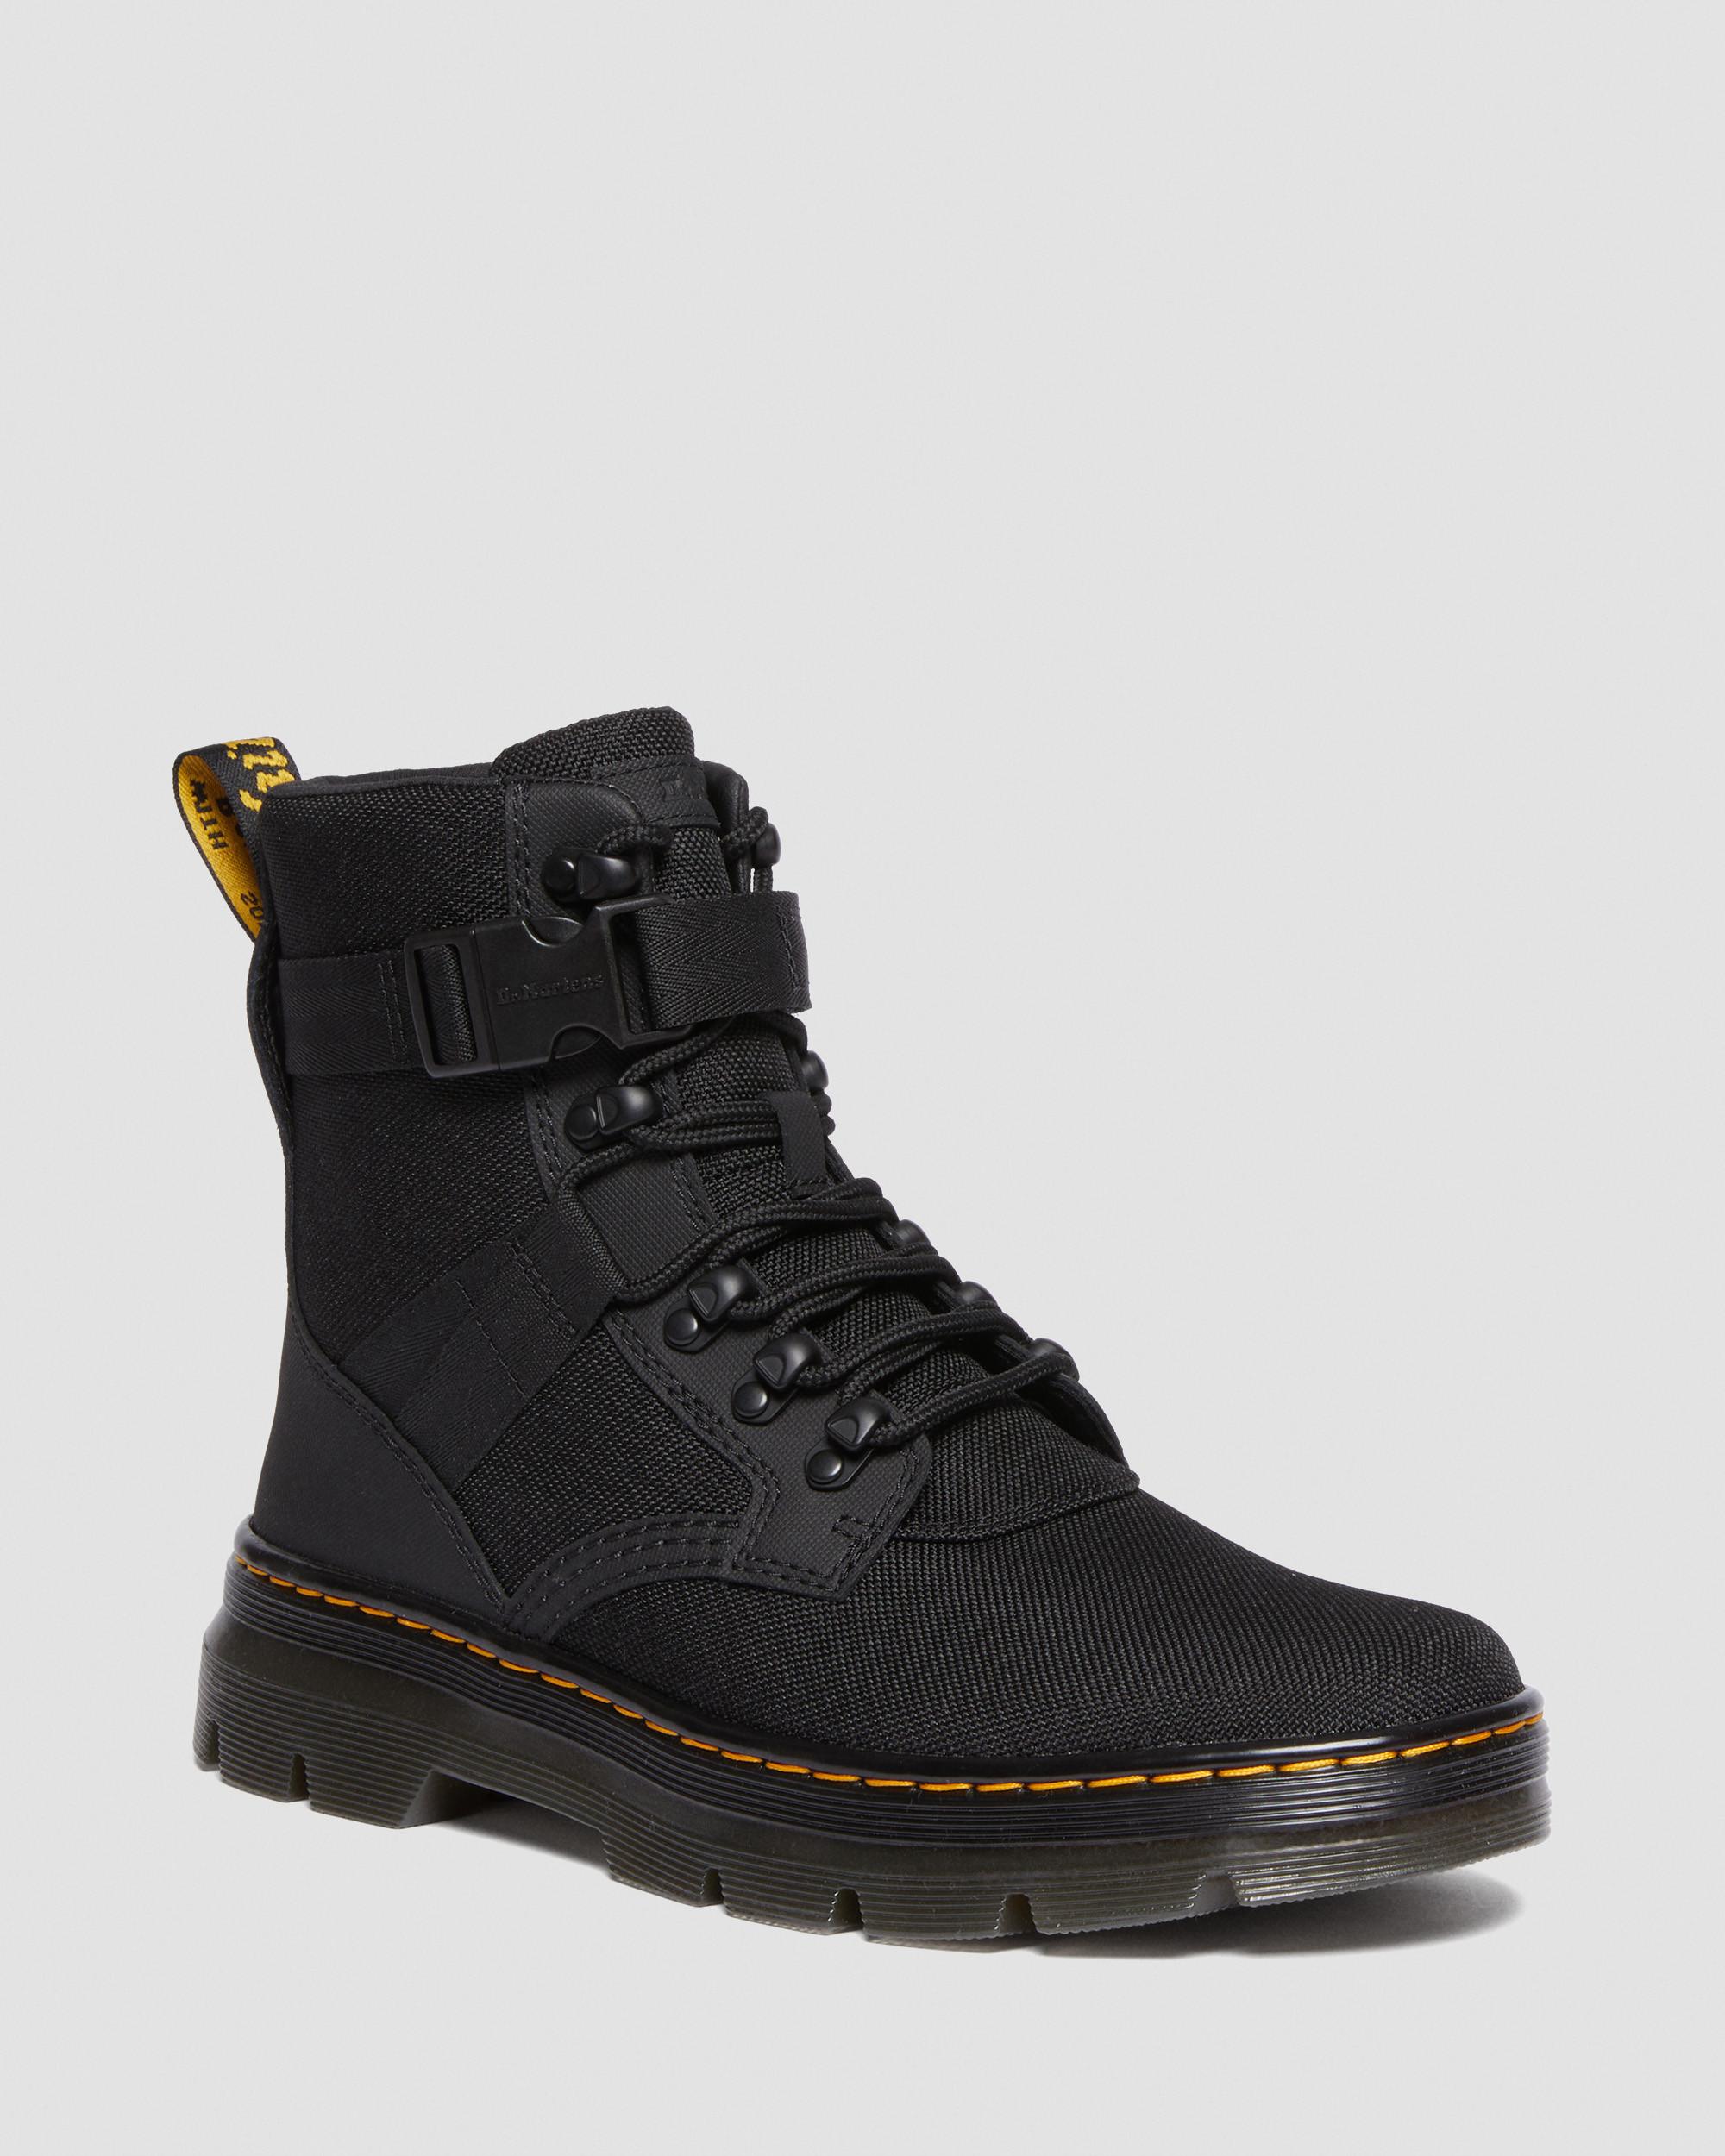 Audrick Nappa Lux Leather Platform Chelsea BootsCombs Tech II Extra Tough Utility Boots Dr. Martens